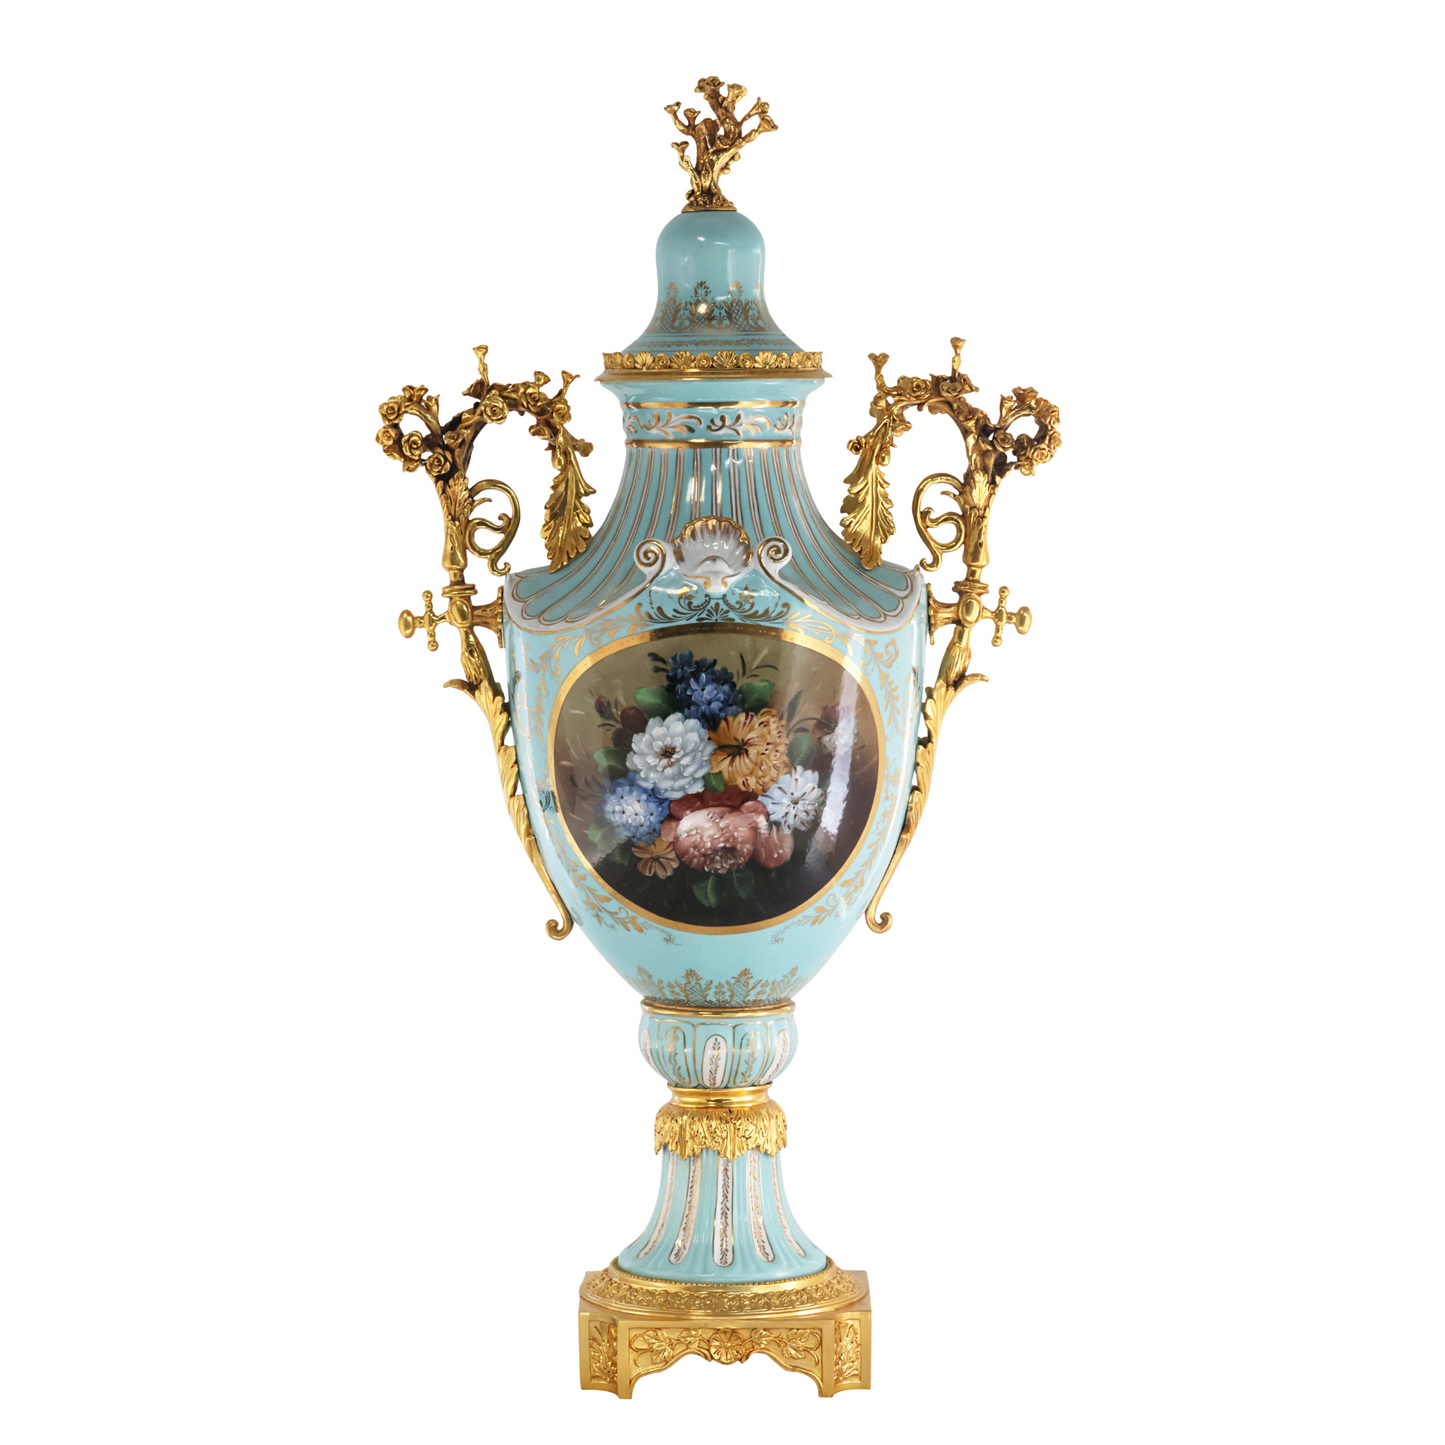 Hand-painted Porcelain Urn with Bronze Flowers